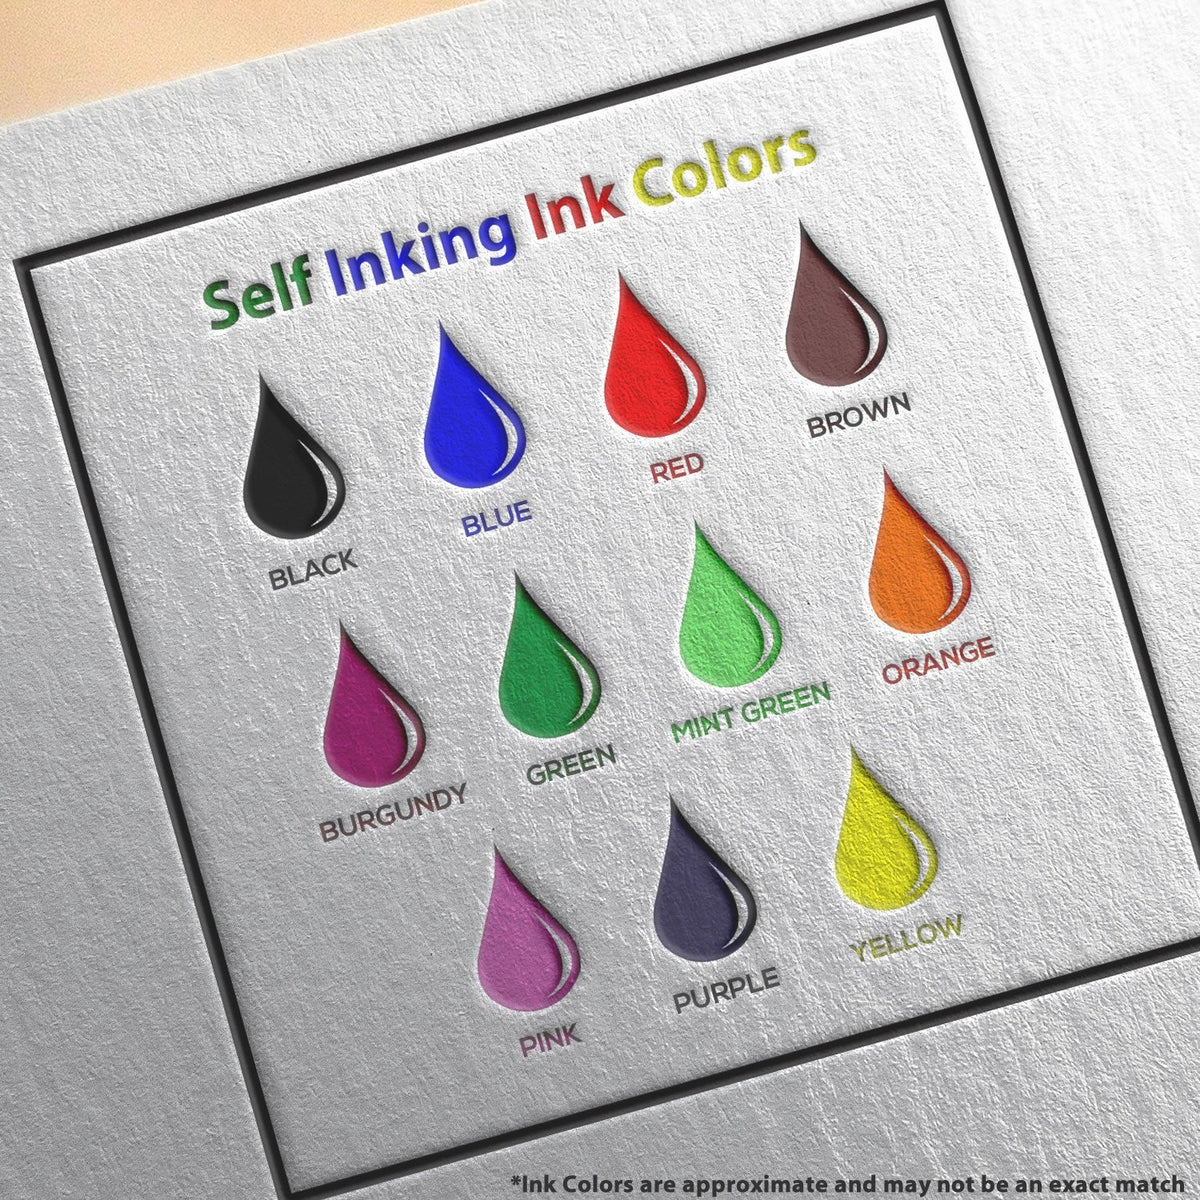 Self-Inking Received Unsealed Stamp Ink Color Options